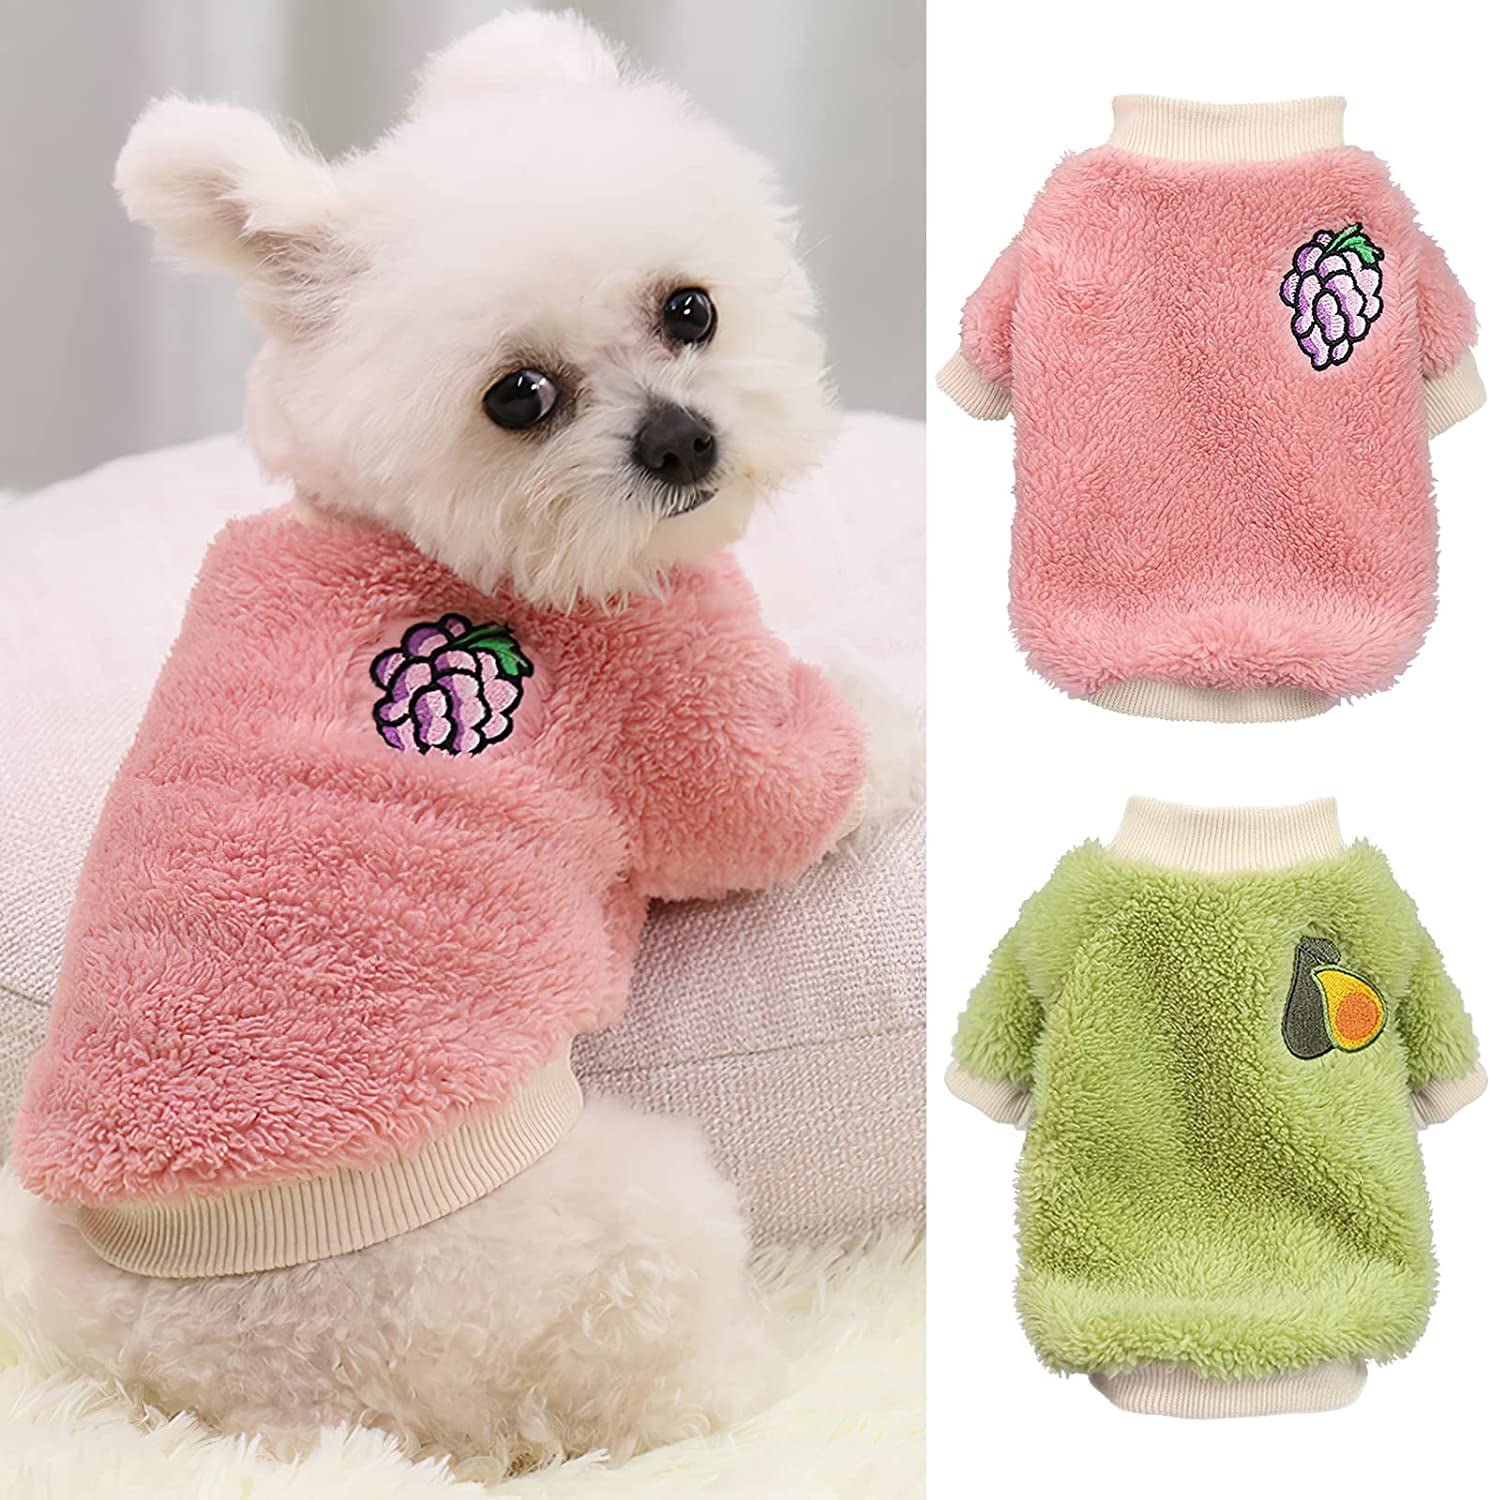 QWZNDZGR Dog Sweaters for Small Dogs, Pet Girl Dog Clothes, Fleece Puppy  Sweater for Extra Small Dogs, Cold Weather Chihuahua Sweater Teacup Yorkie,  Cute Dog Outfit Cat Clothing,3 Piece 